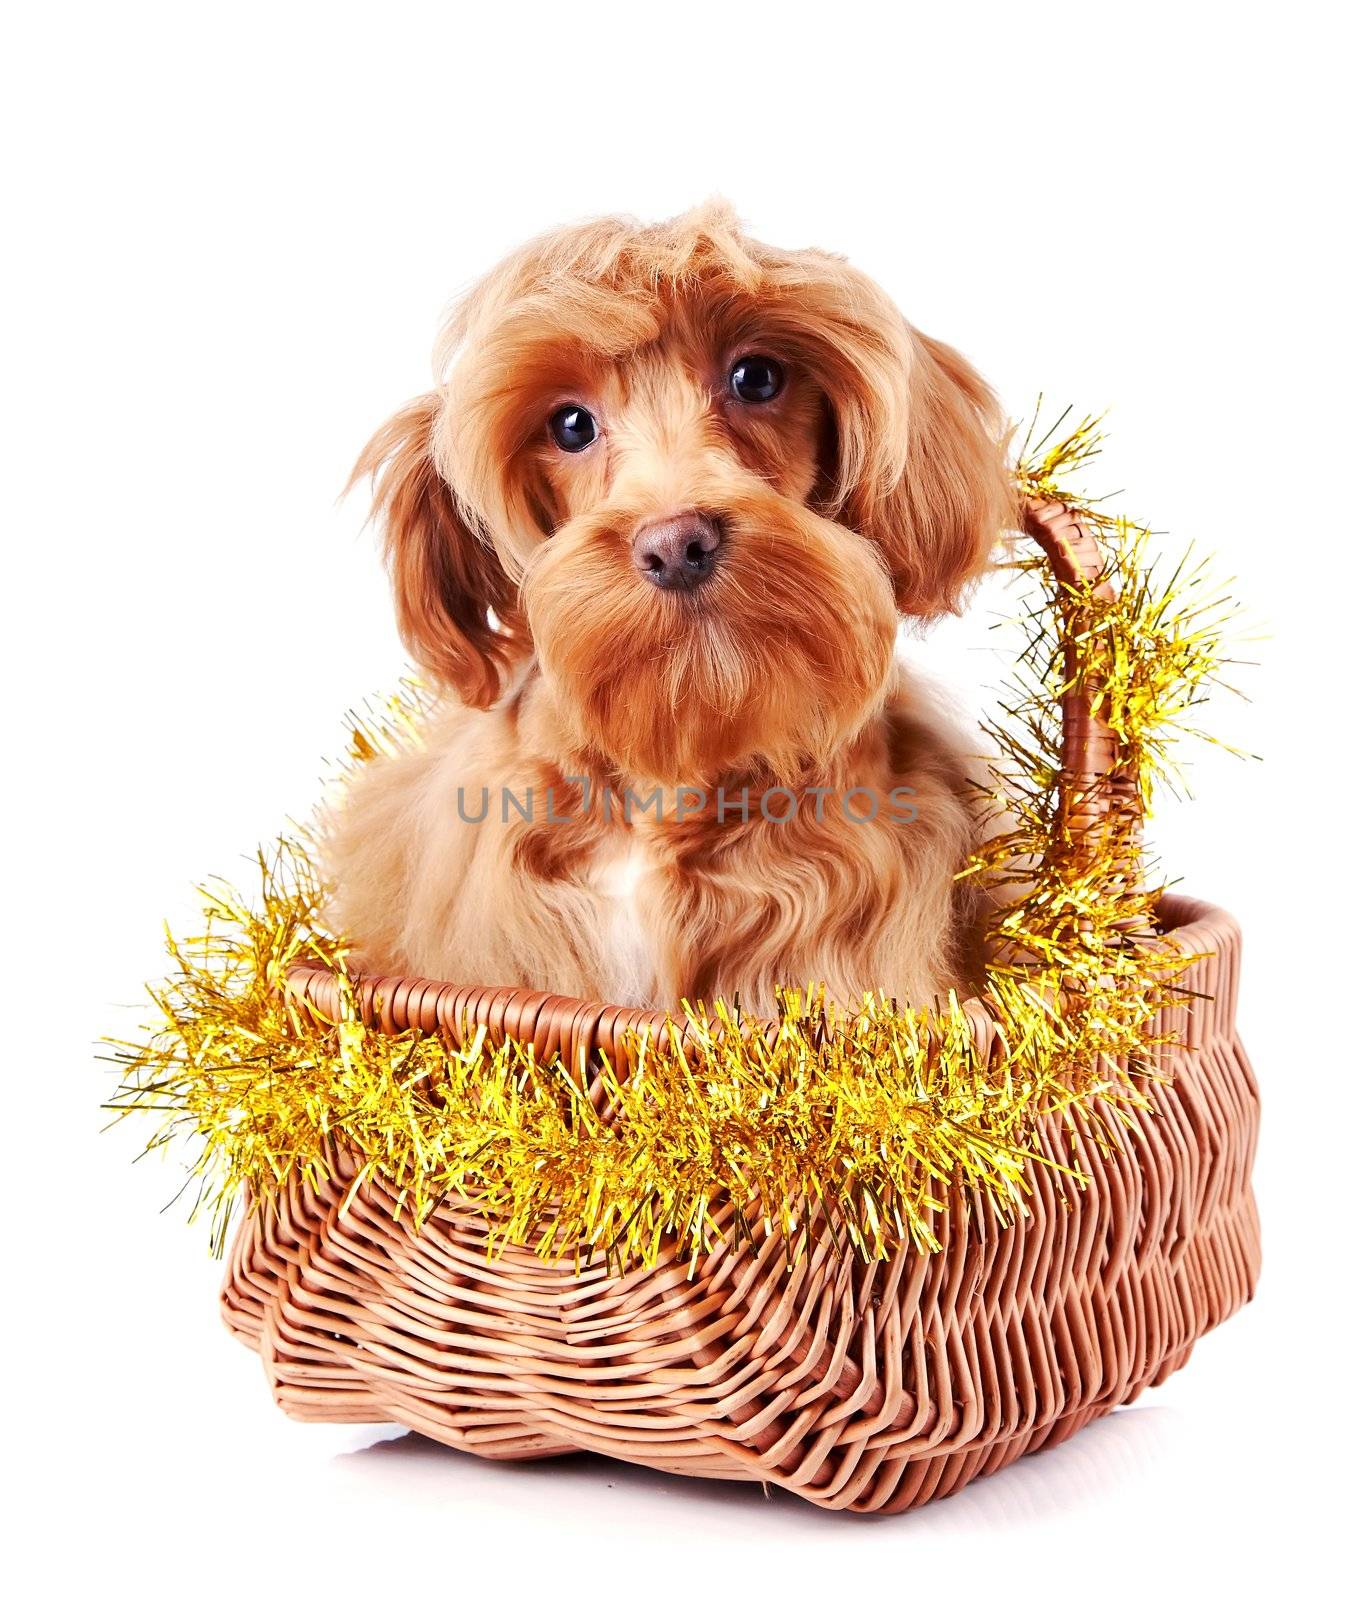 Small doggie. Decorative thoroughbred dog. Puppy of the Petersburg orchid. Doggie in a basket.